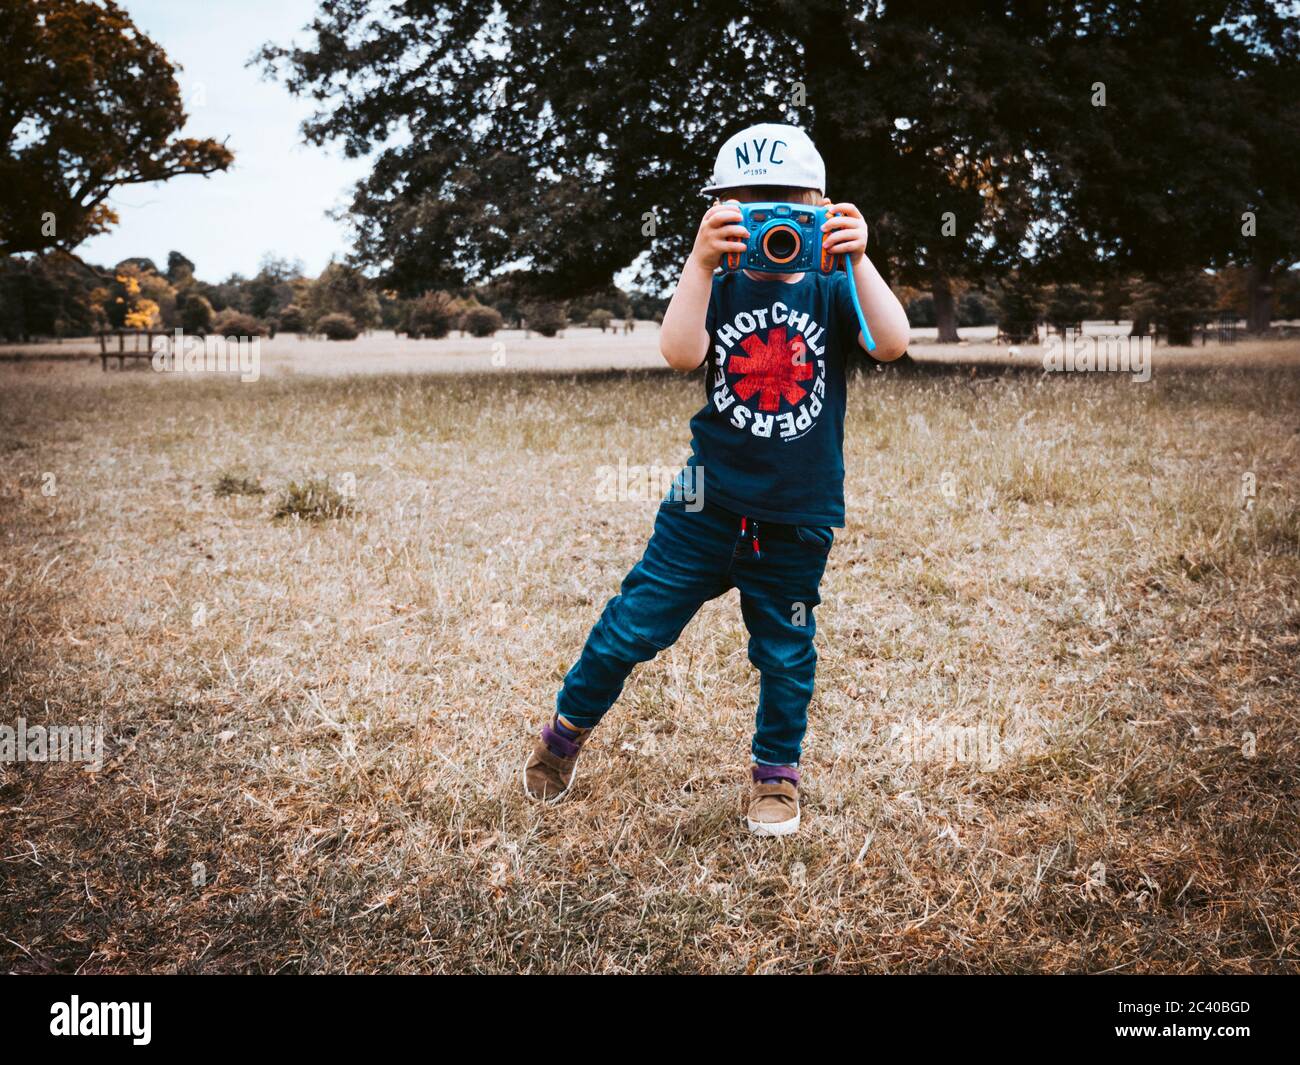 A young child outdoors  and wearing a baseball cap and t shirt a taking photograph with a camera designed for children Stock Photo